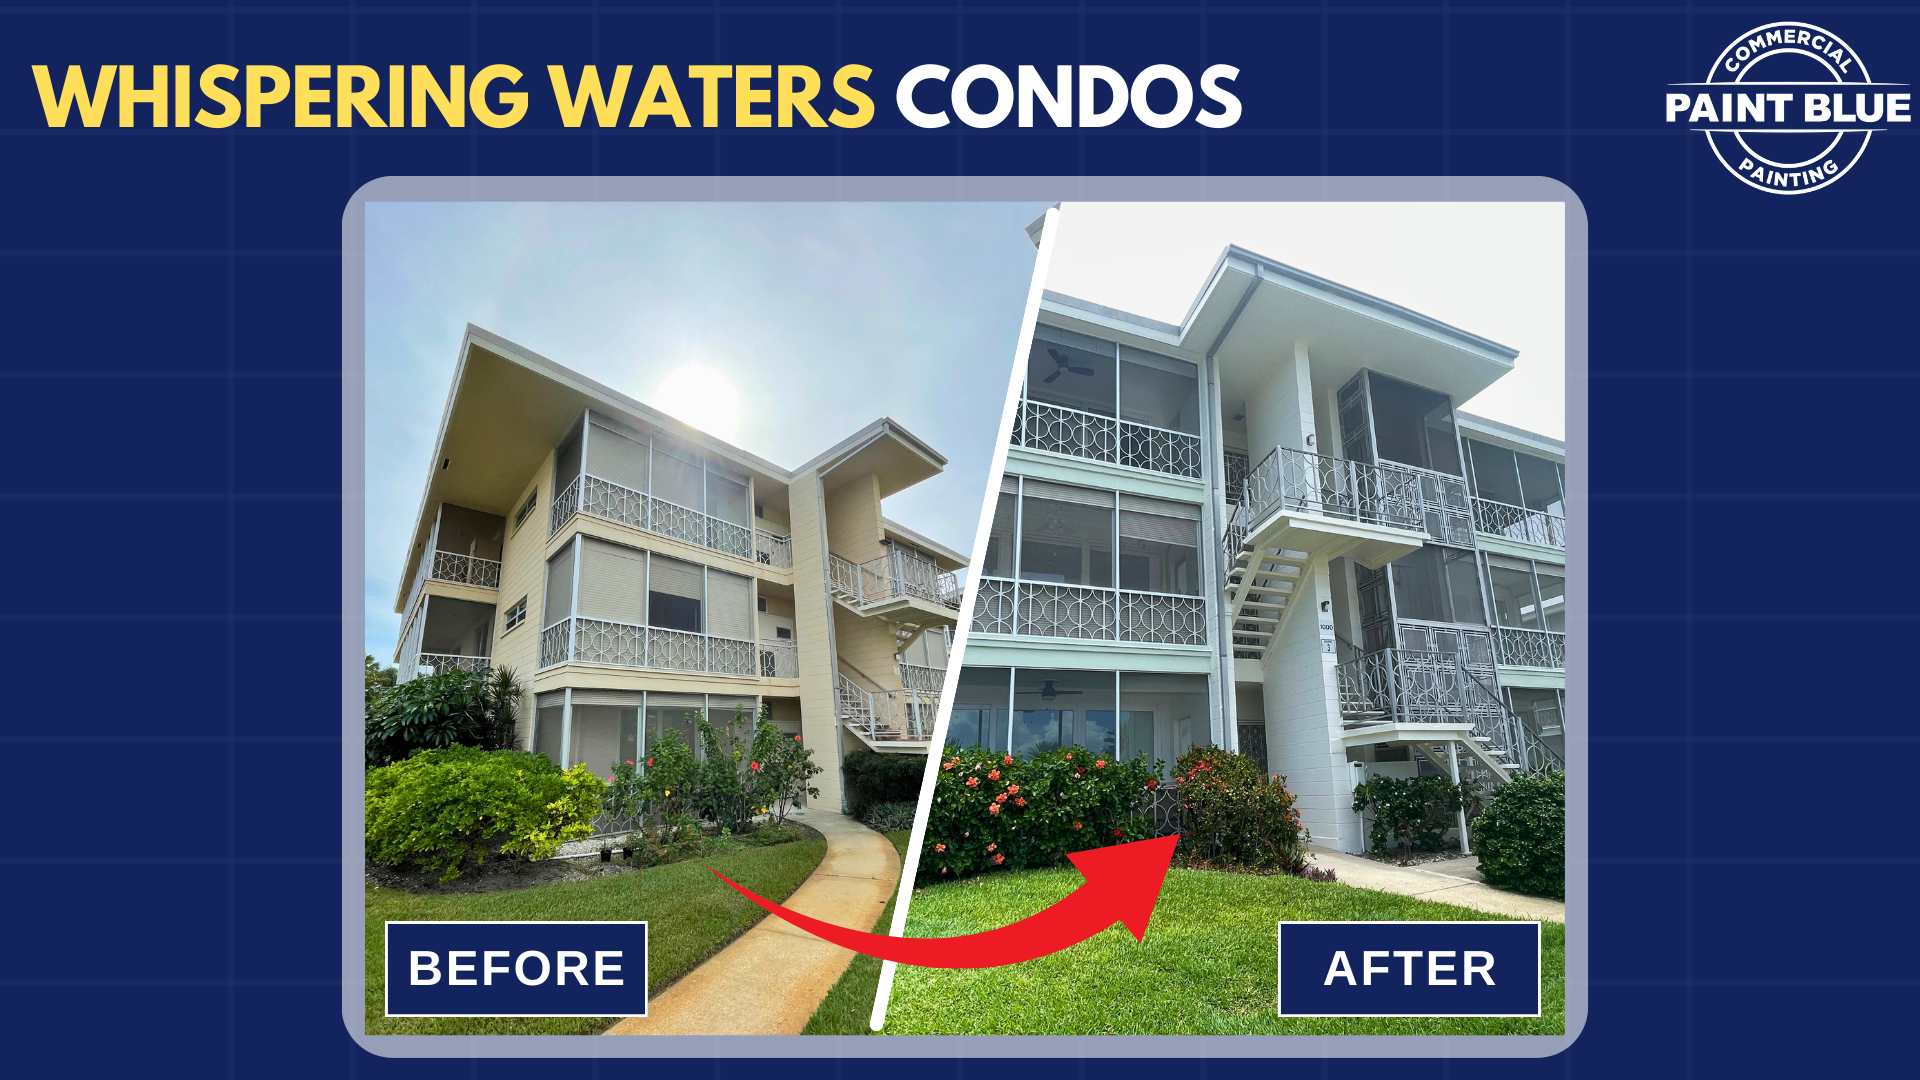 WHISPERING WATERS CONDOS